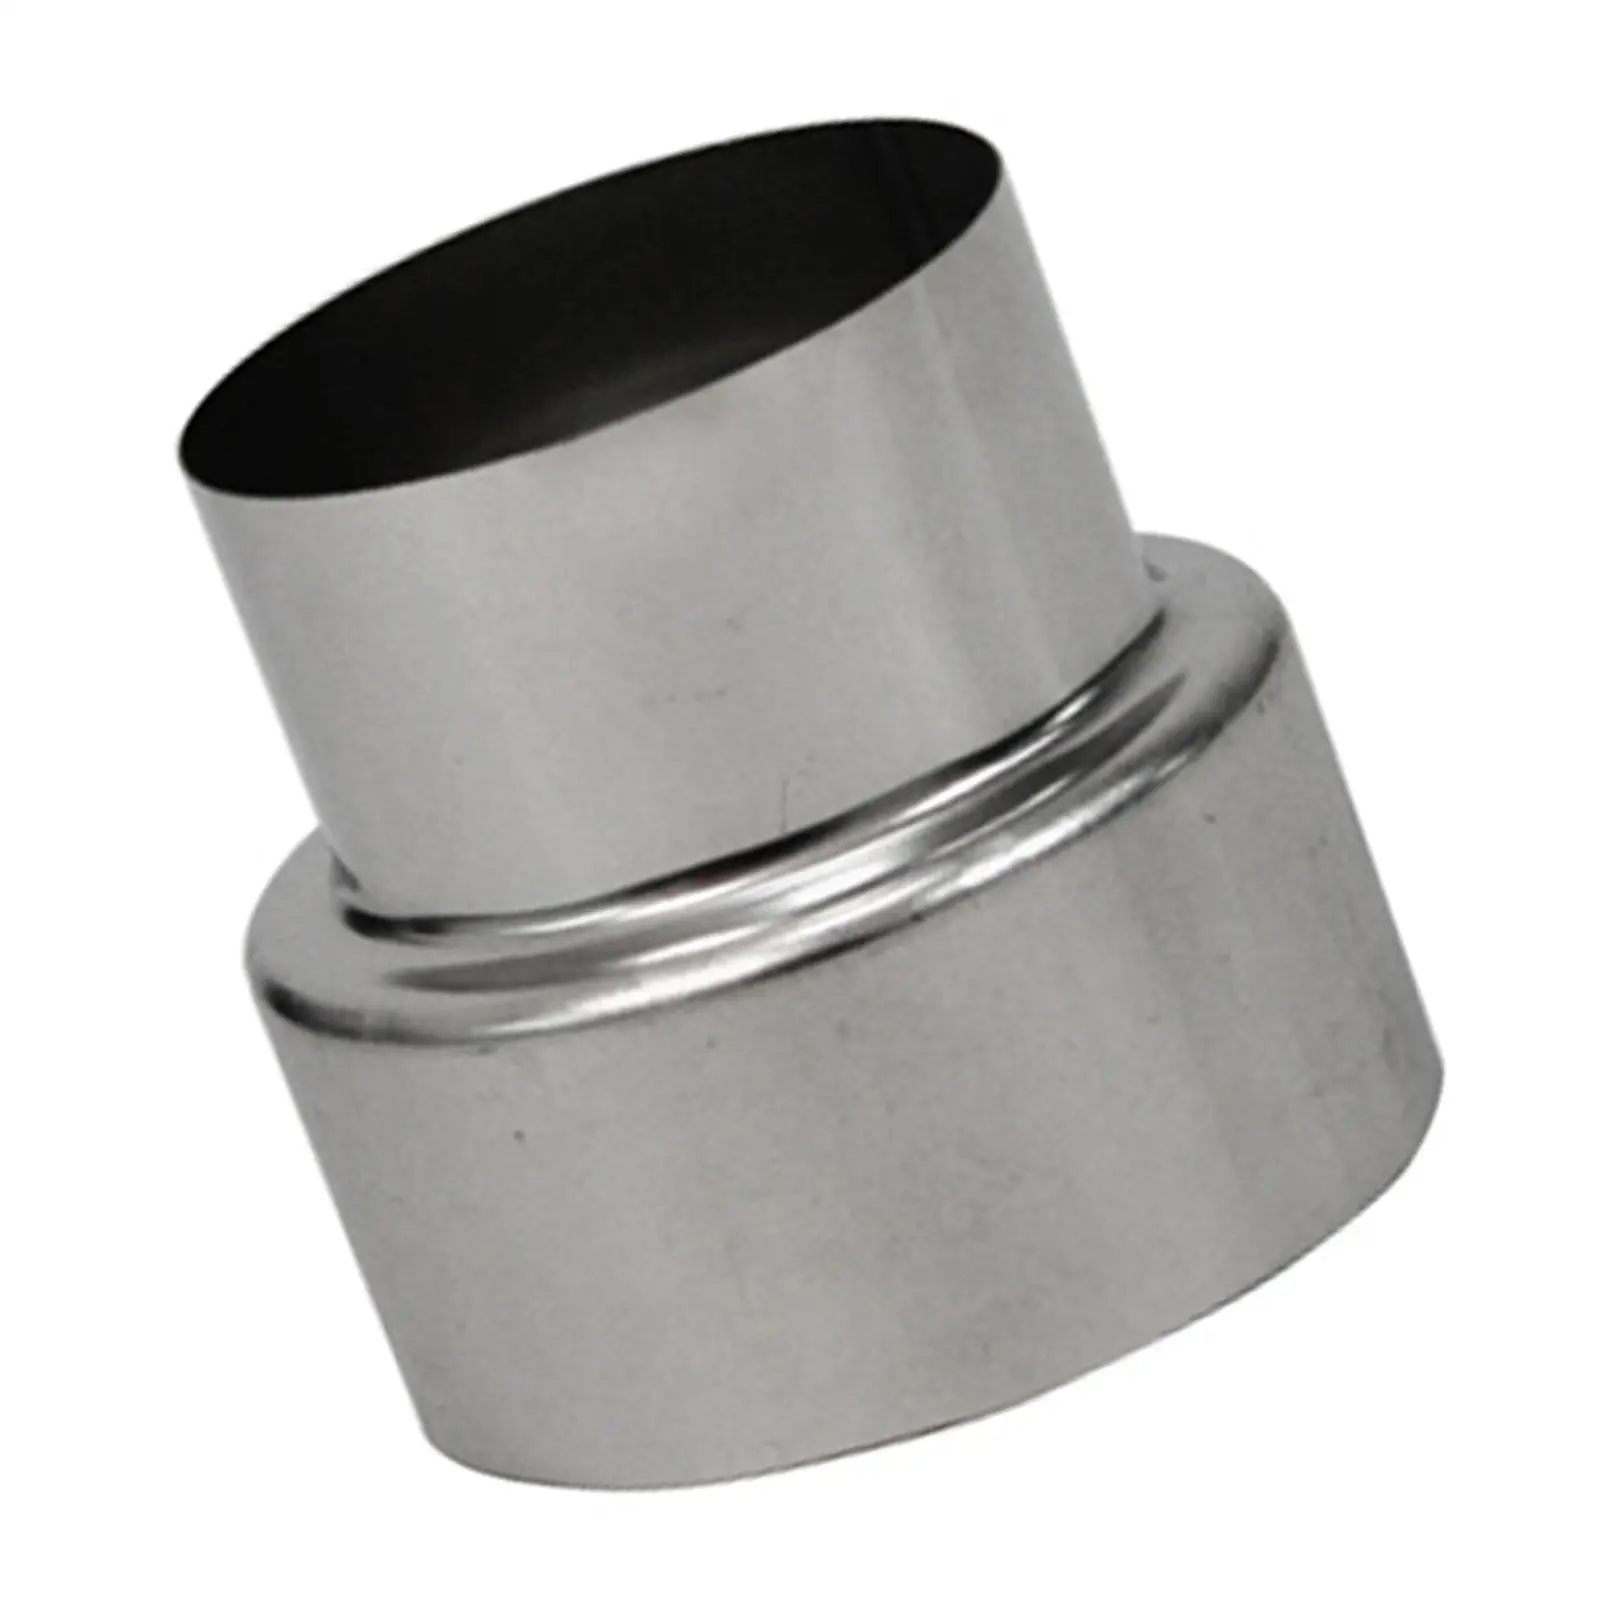 Chimney Connection Pipe Reduction Sturdy Flue Pipe Reducer Chimney Adapter